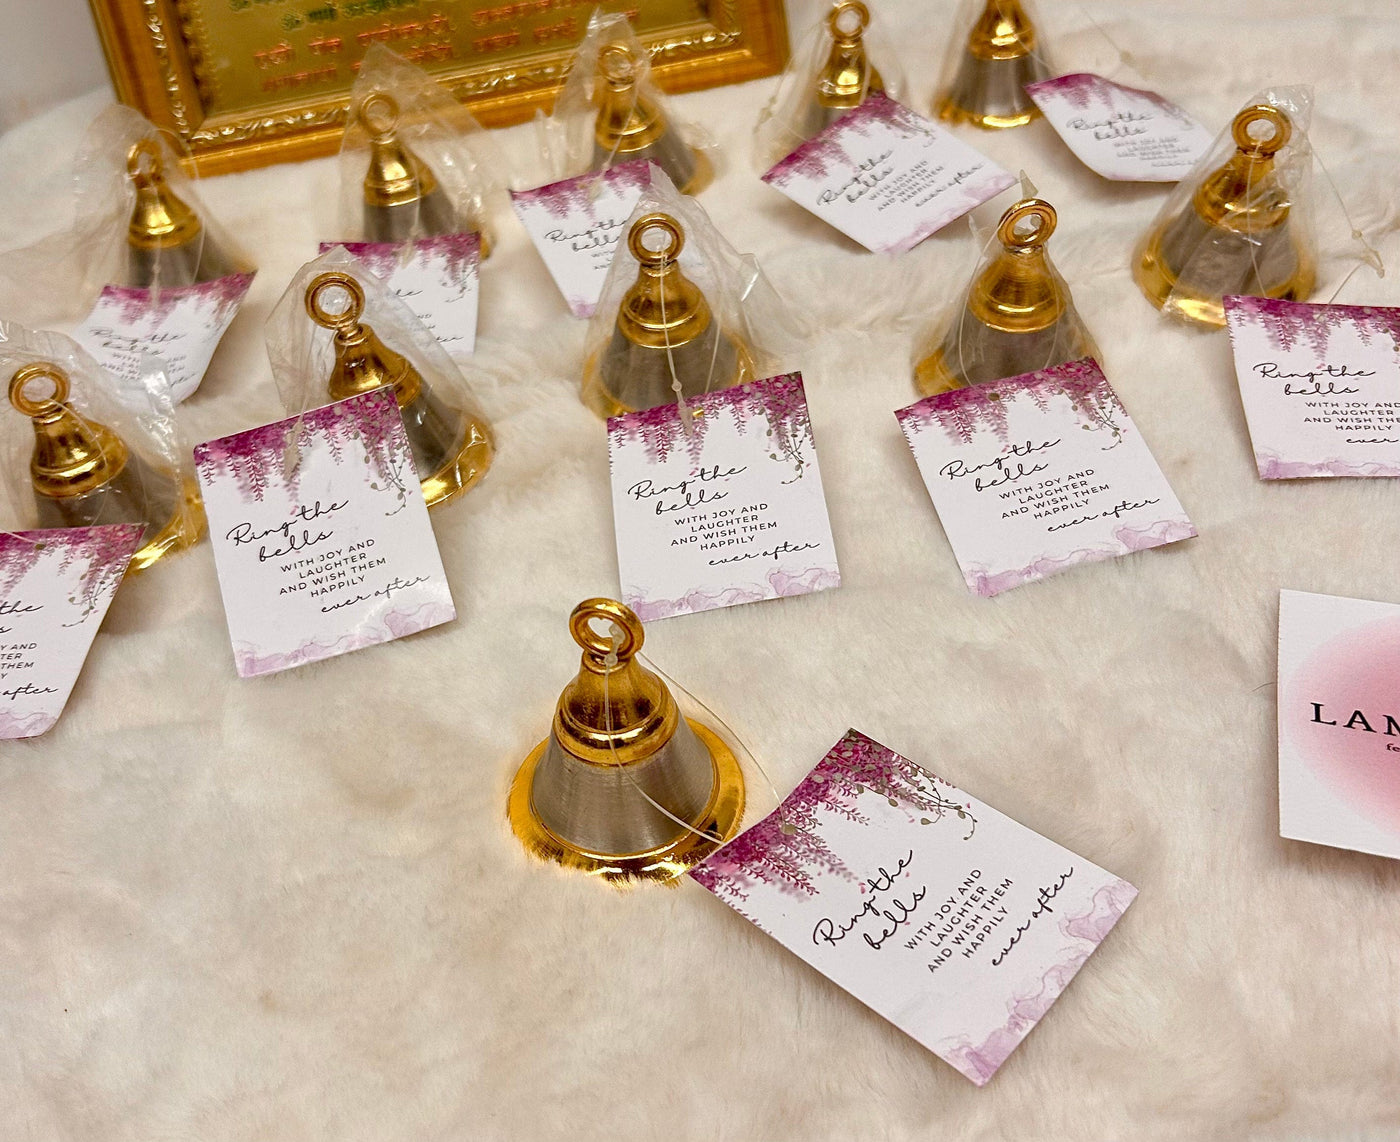 85 Rs each on Purchasing 100+ qty | Contact 8619550223 bells for couple welcome LAMANSH® Silver Golden Plated Bells 🔔 for welcoming couple's in wedding | German silver Gift Bells 🔔 with mini tags for wedding guests